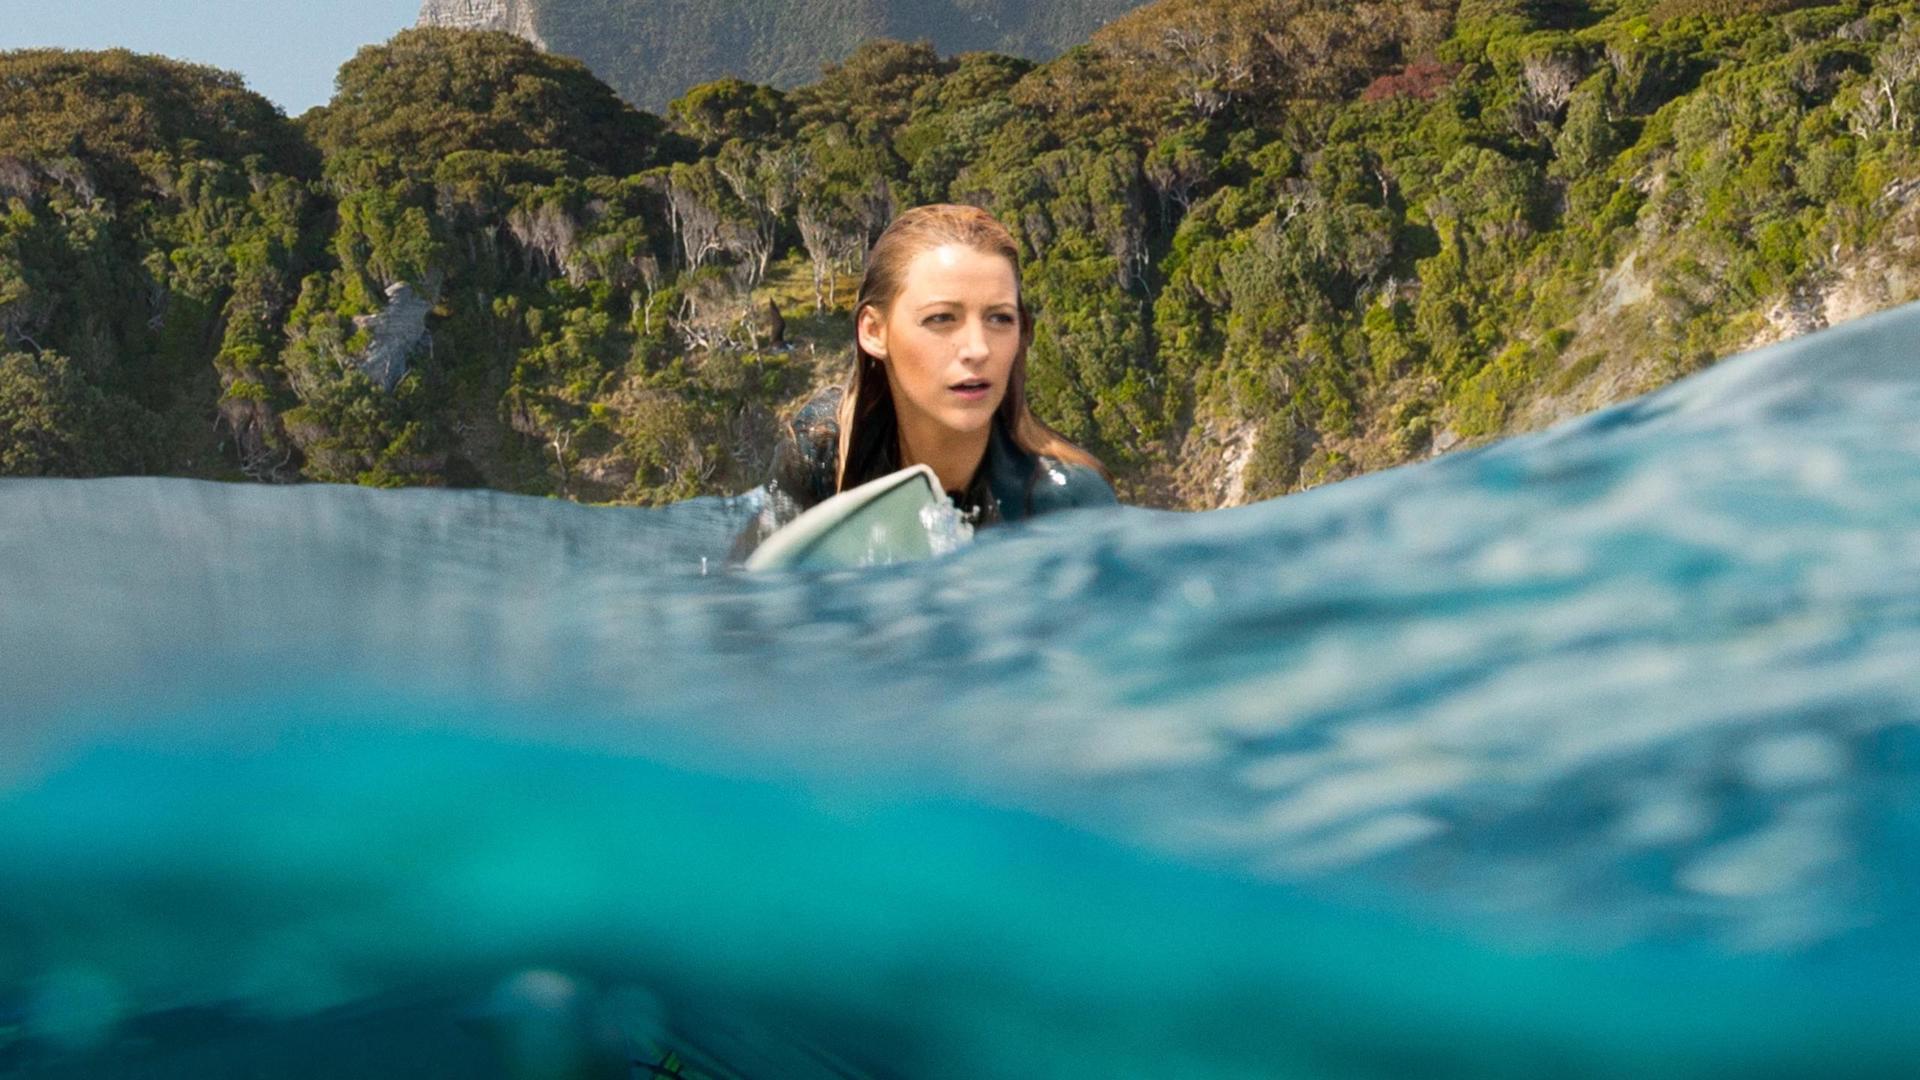 The Shallows is on Showmax